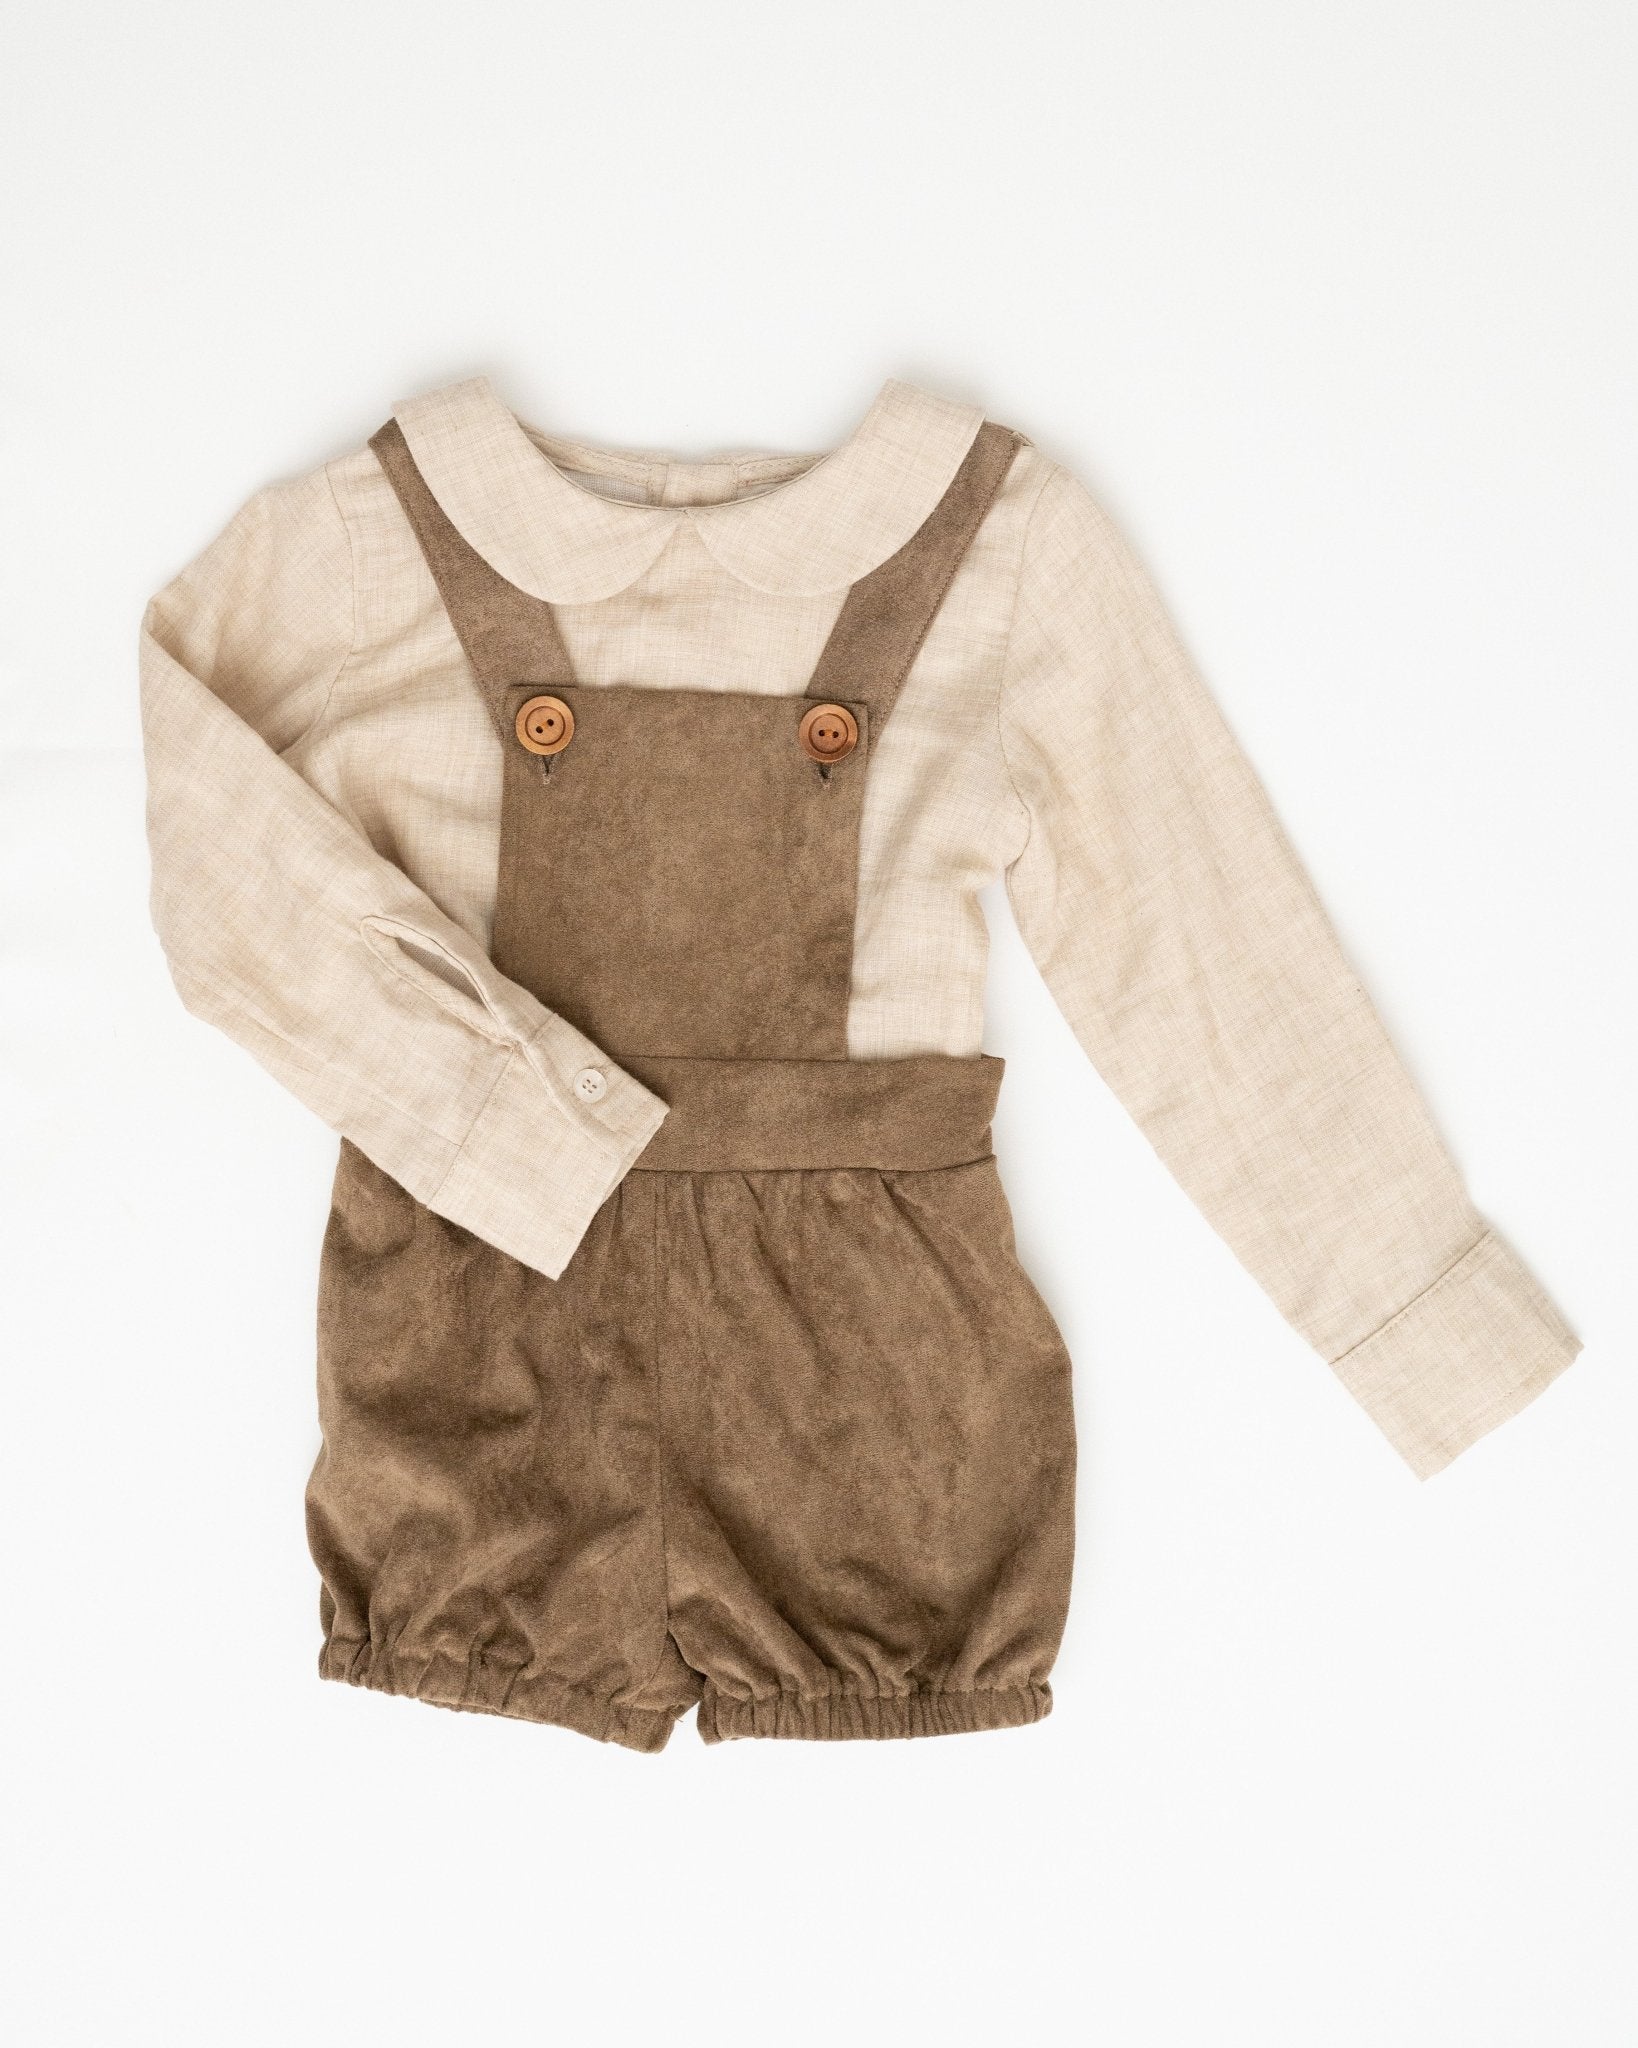 Letting Go Tan Button Accent Boys Romper - Evie's Closet Clothing